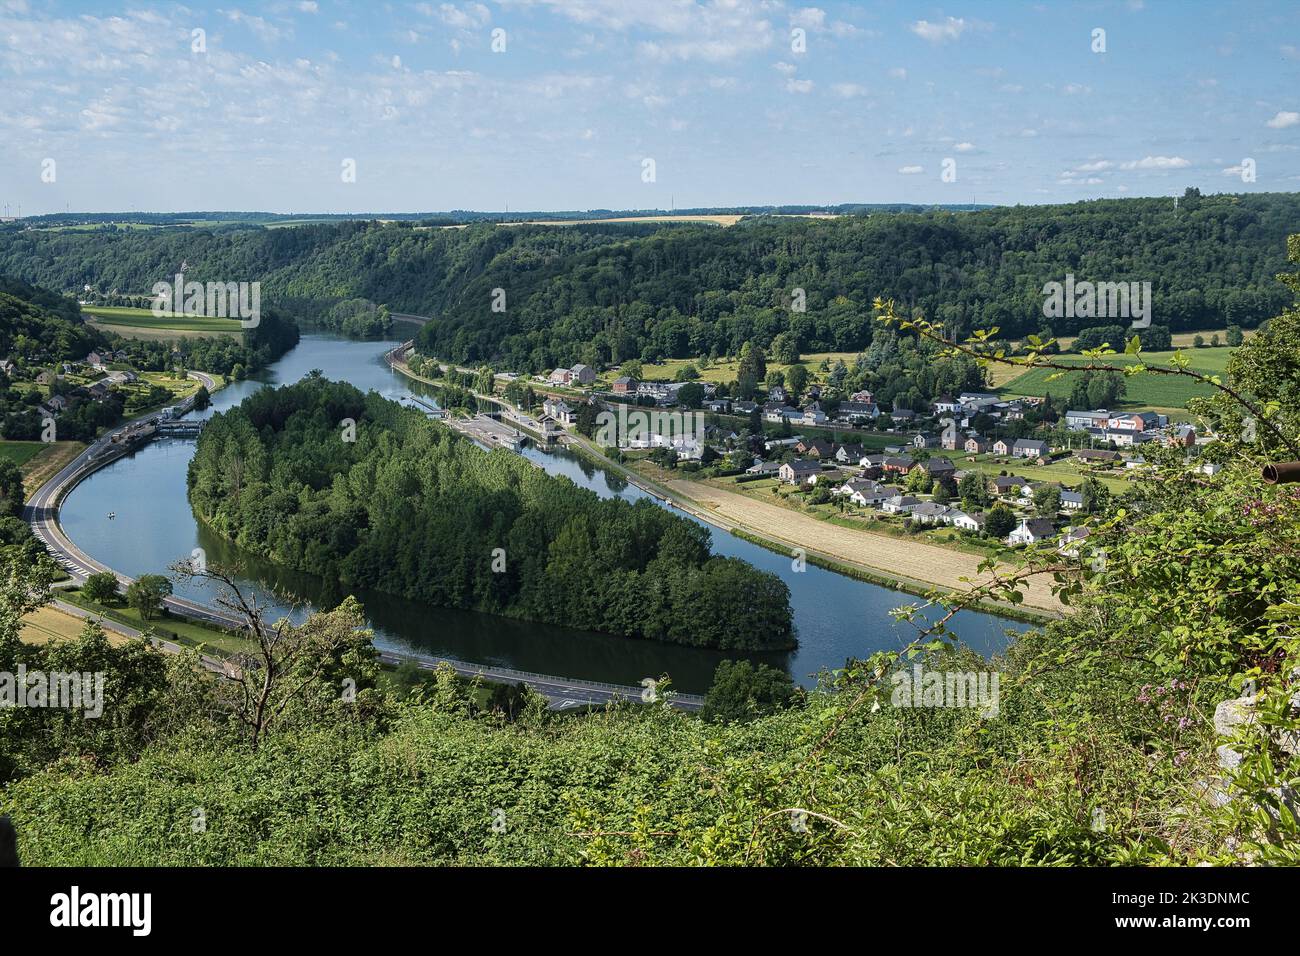 A high-angle shot of Poilvache castle precinct with a lake and forested hills, blue sky background Stock Photo